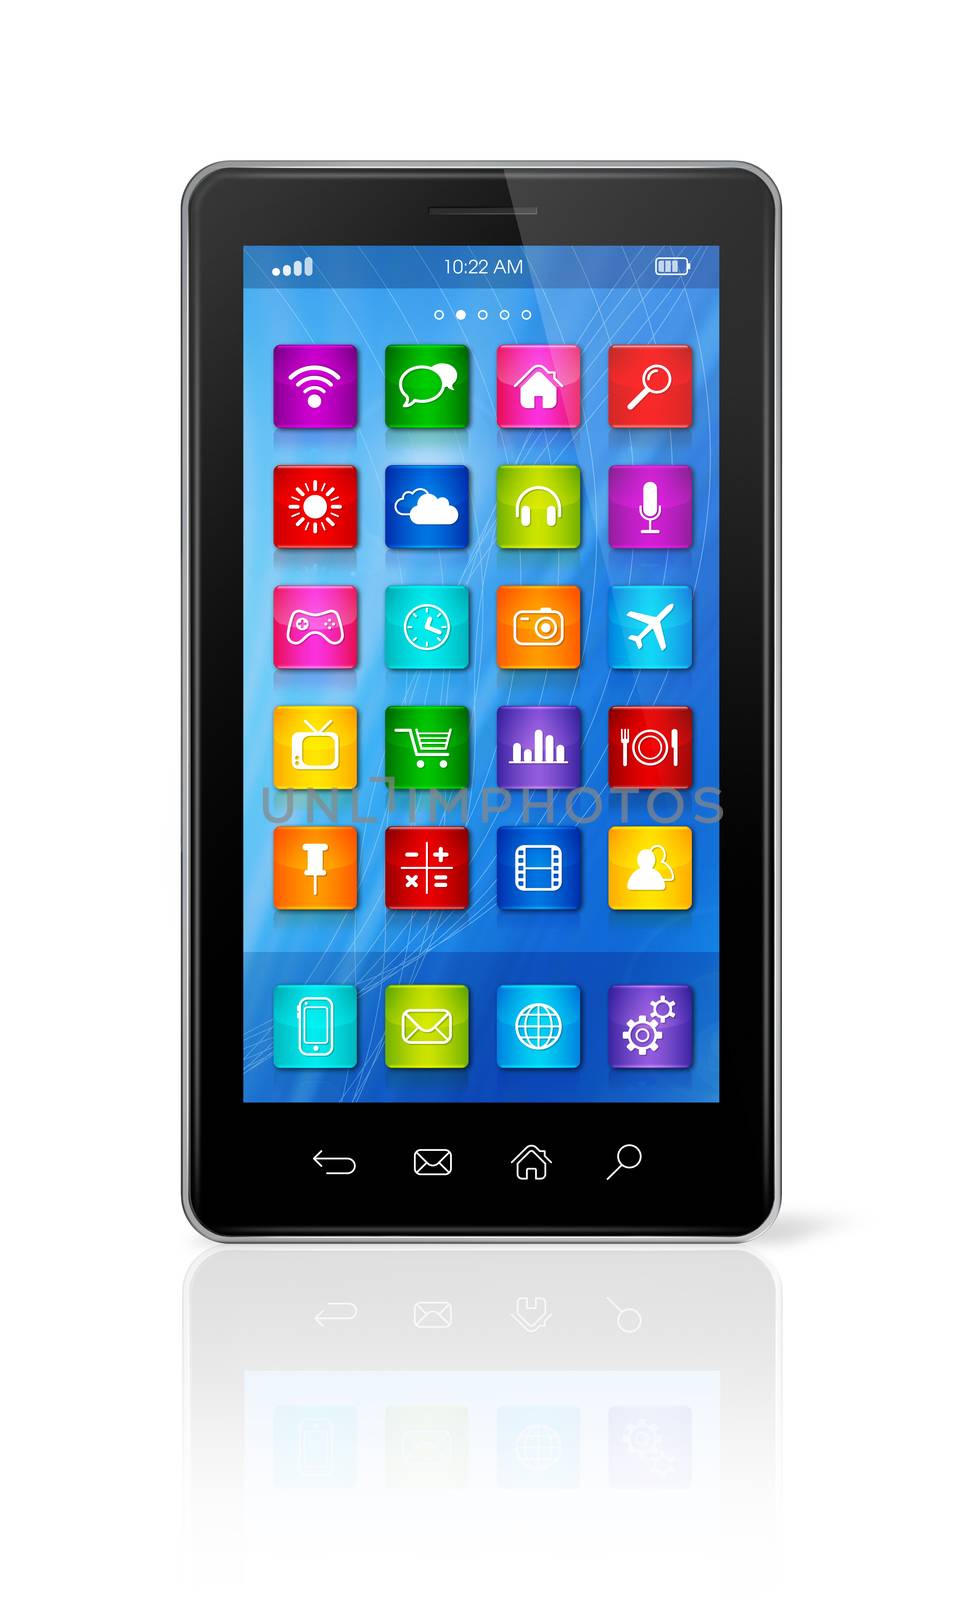 Smartphone Touchscreen HD - apps icons interface by daboost